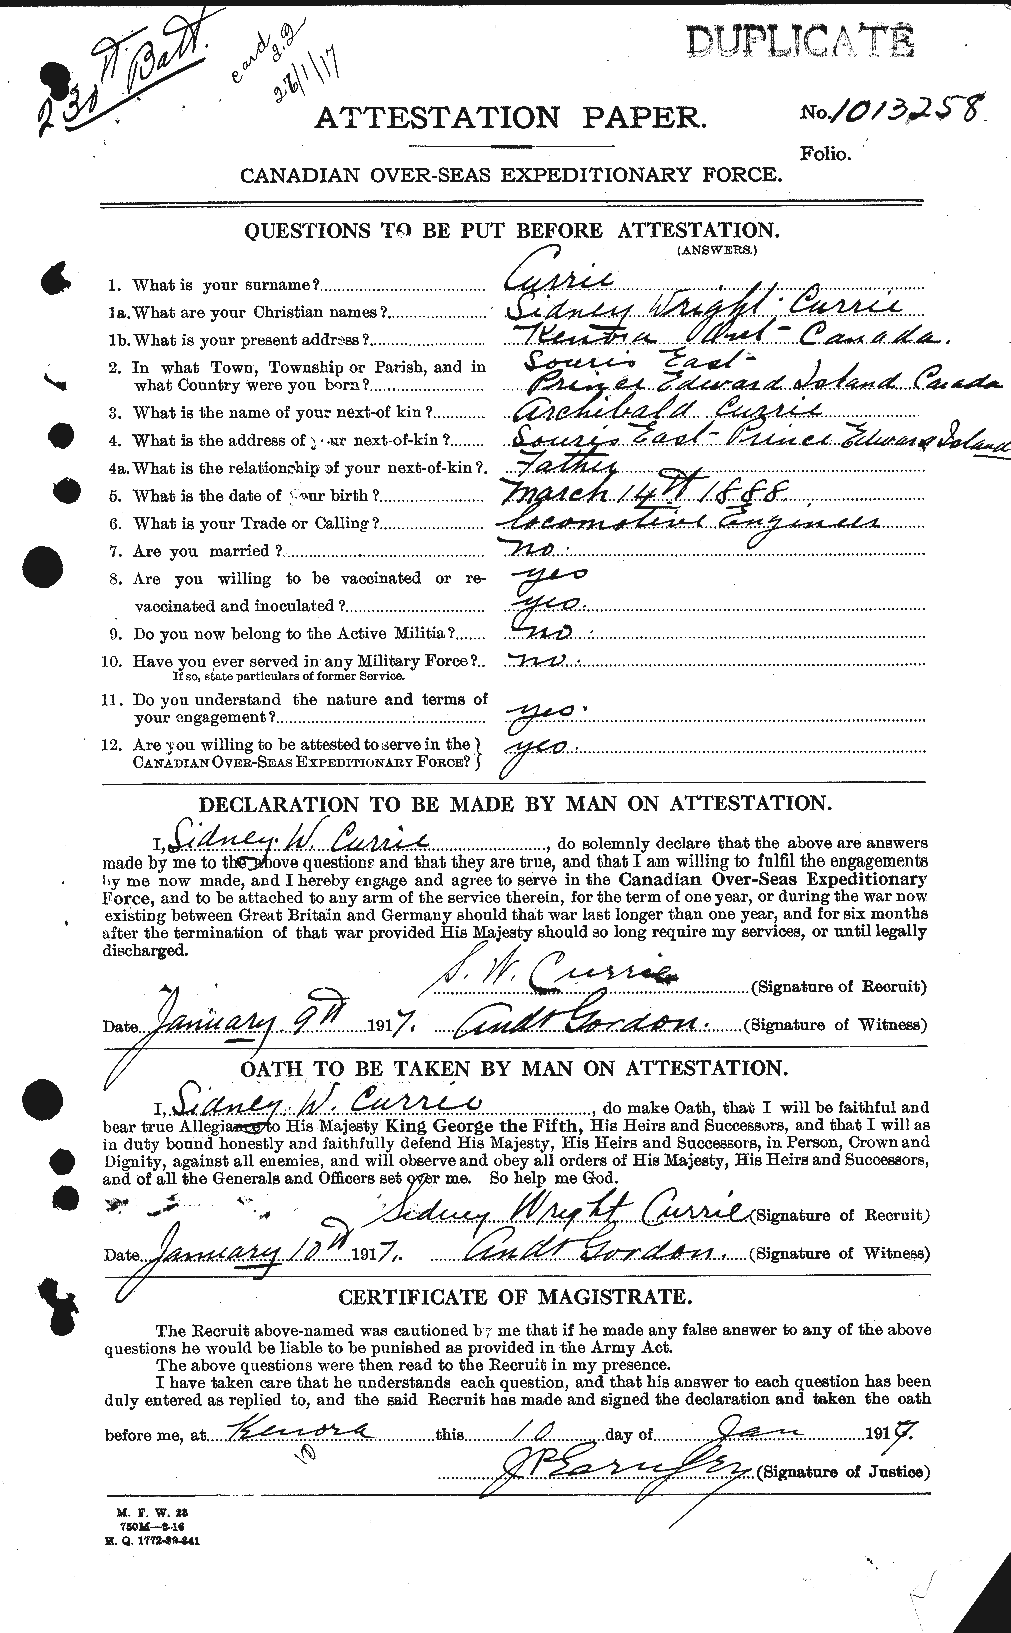 Personnel Records of the First World War - CEF 071824a